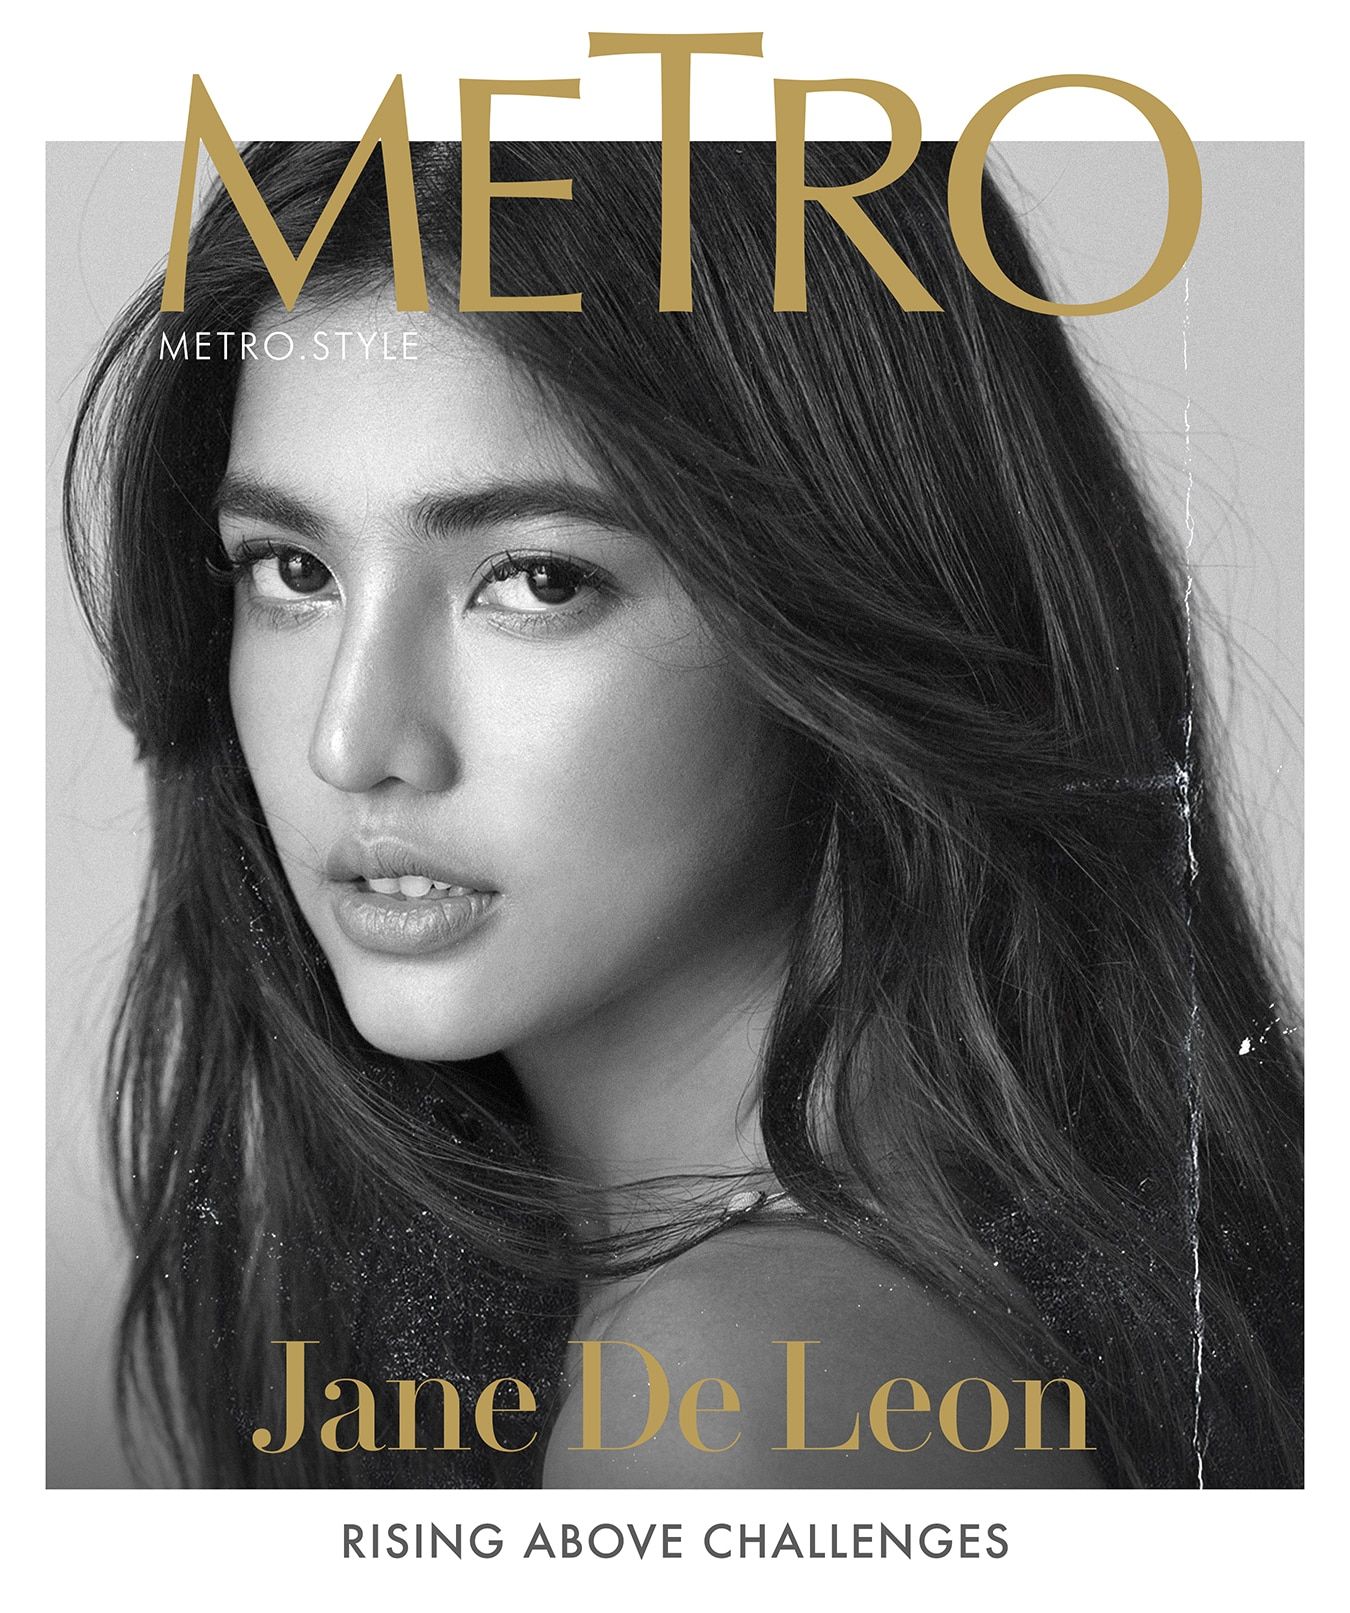 EXCLUSIVE! Jane de Leon Steps Up To The Plate